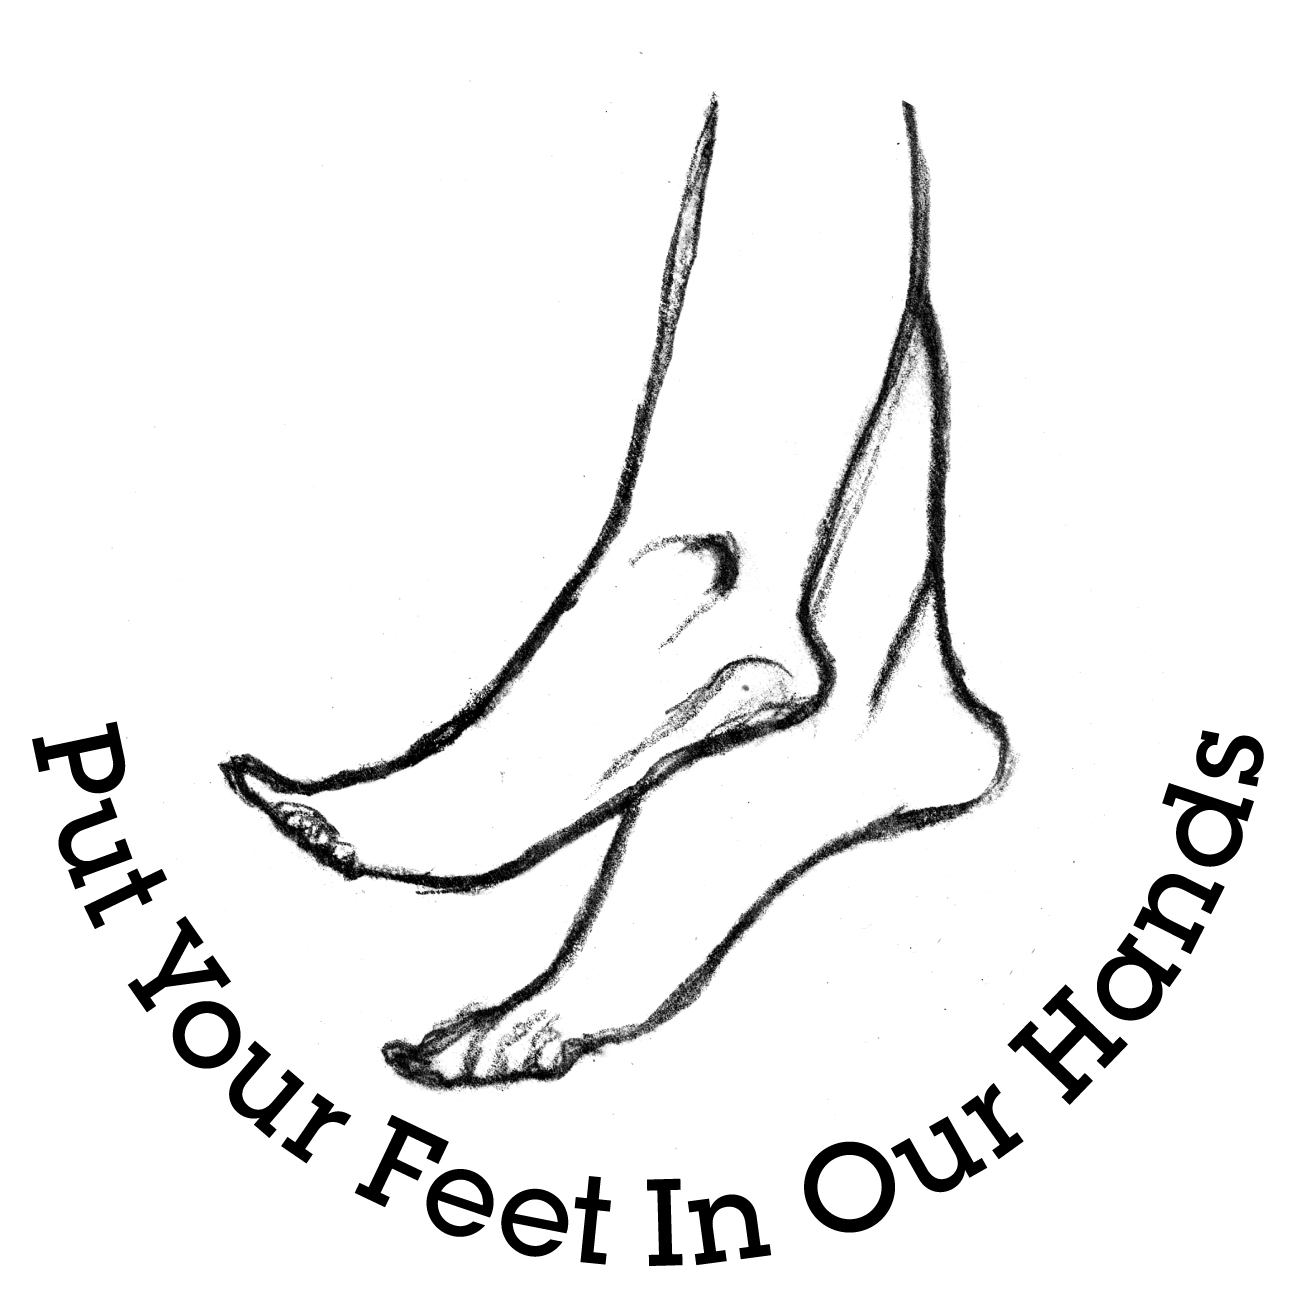 Birkbeck Chiropody And Podiatry Put Your Feet In Our Hands 